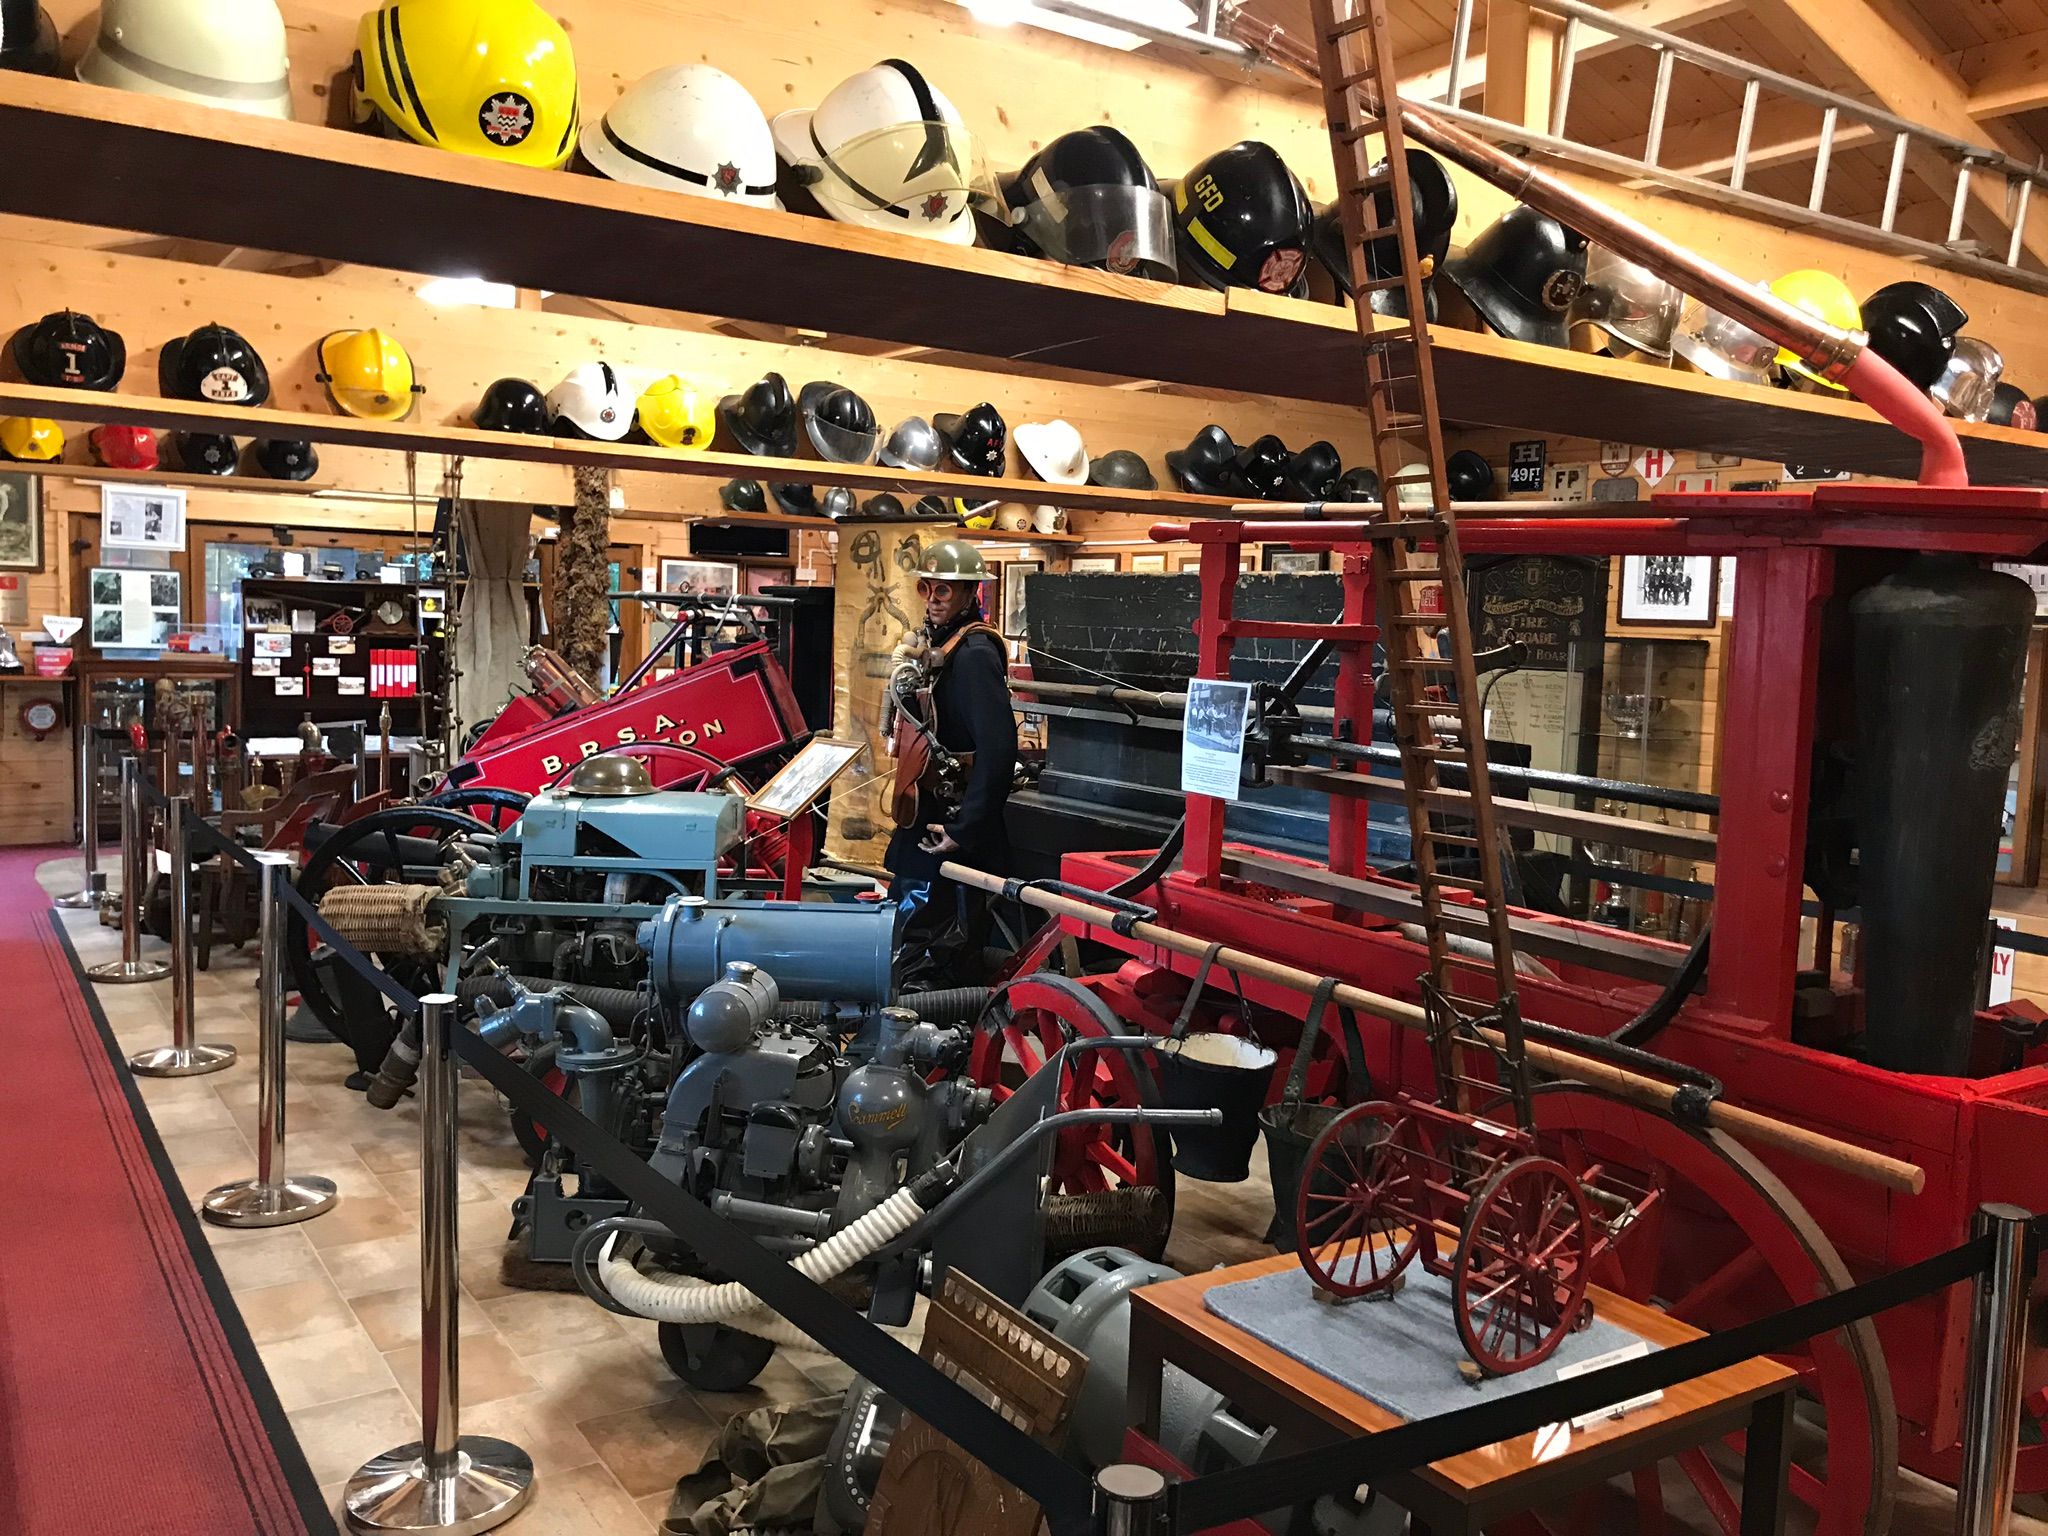 The amazing display of firefighting equipment and memoriabilia in the musem